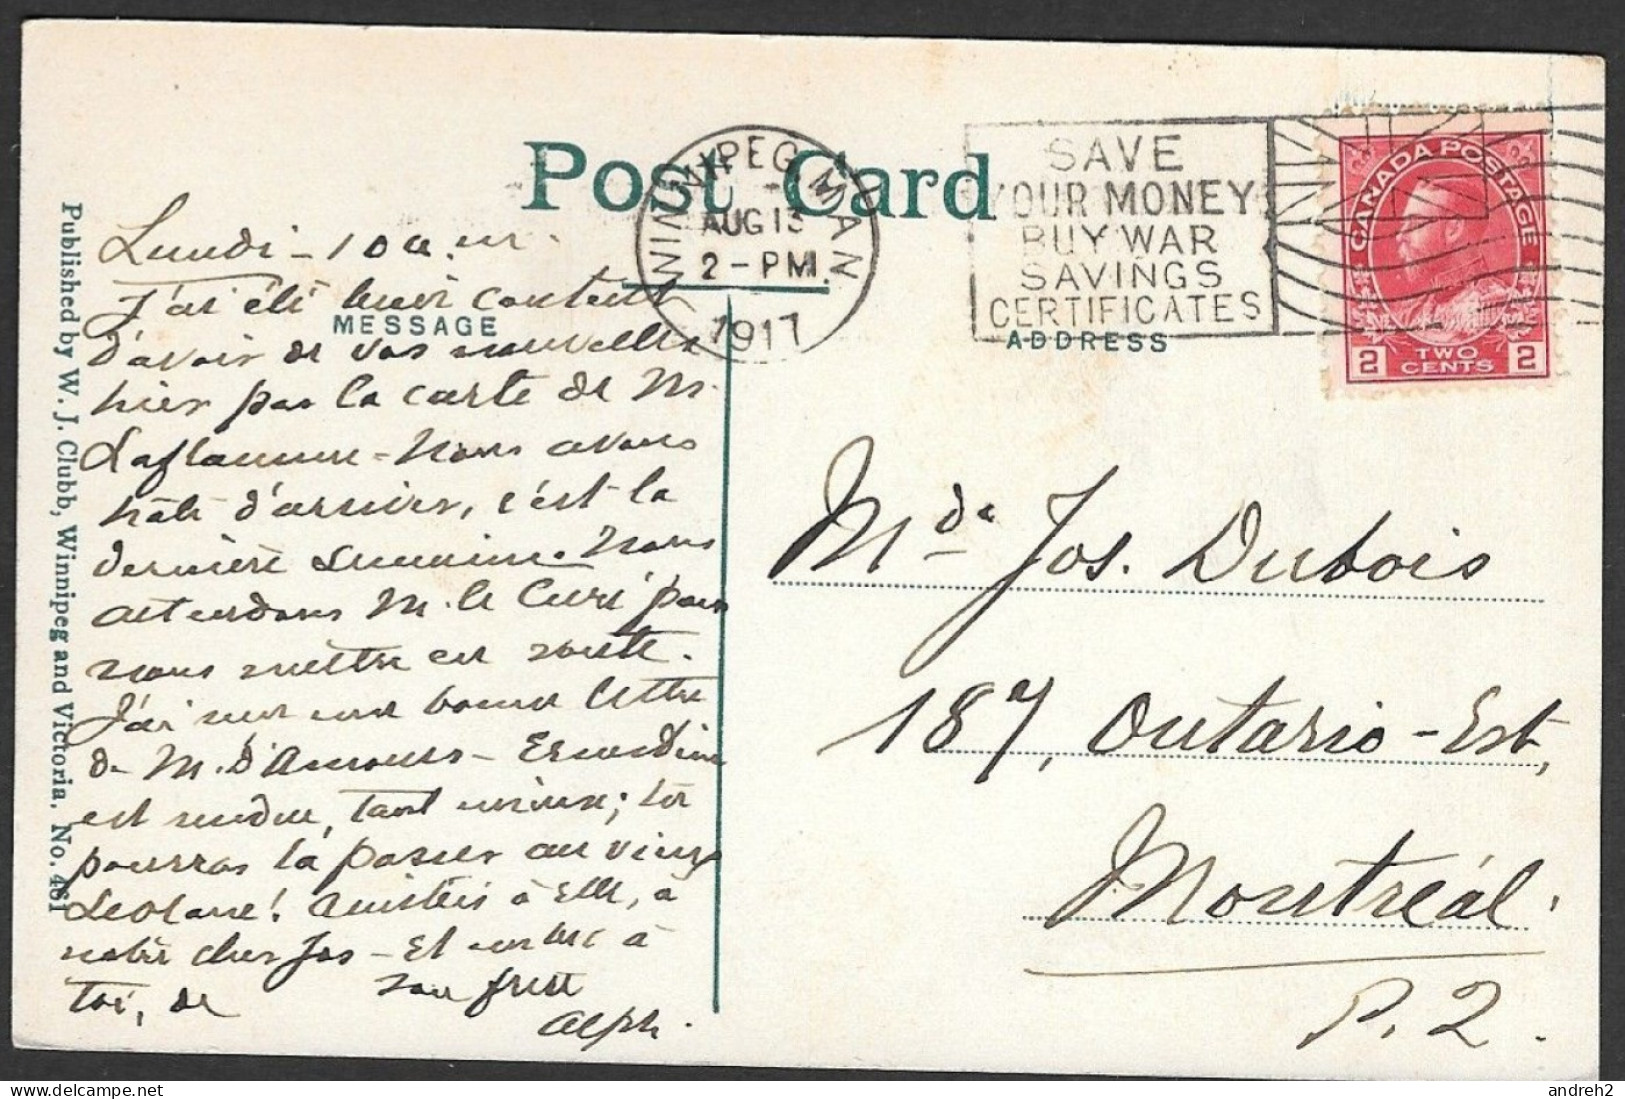 Winnipeg  Manitoba - C.P.A. Court House - Postmarked 1917 With A Nice Stamp - By W.J. Clubb - Winnipeg